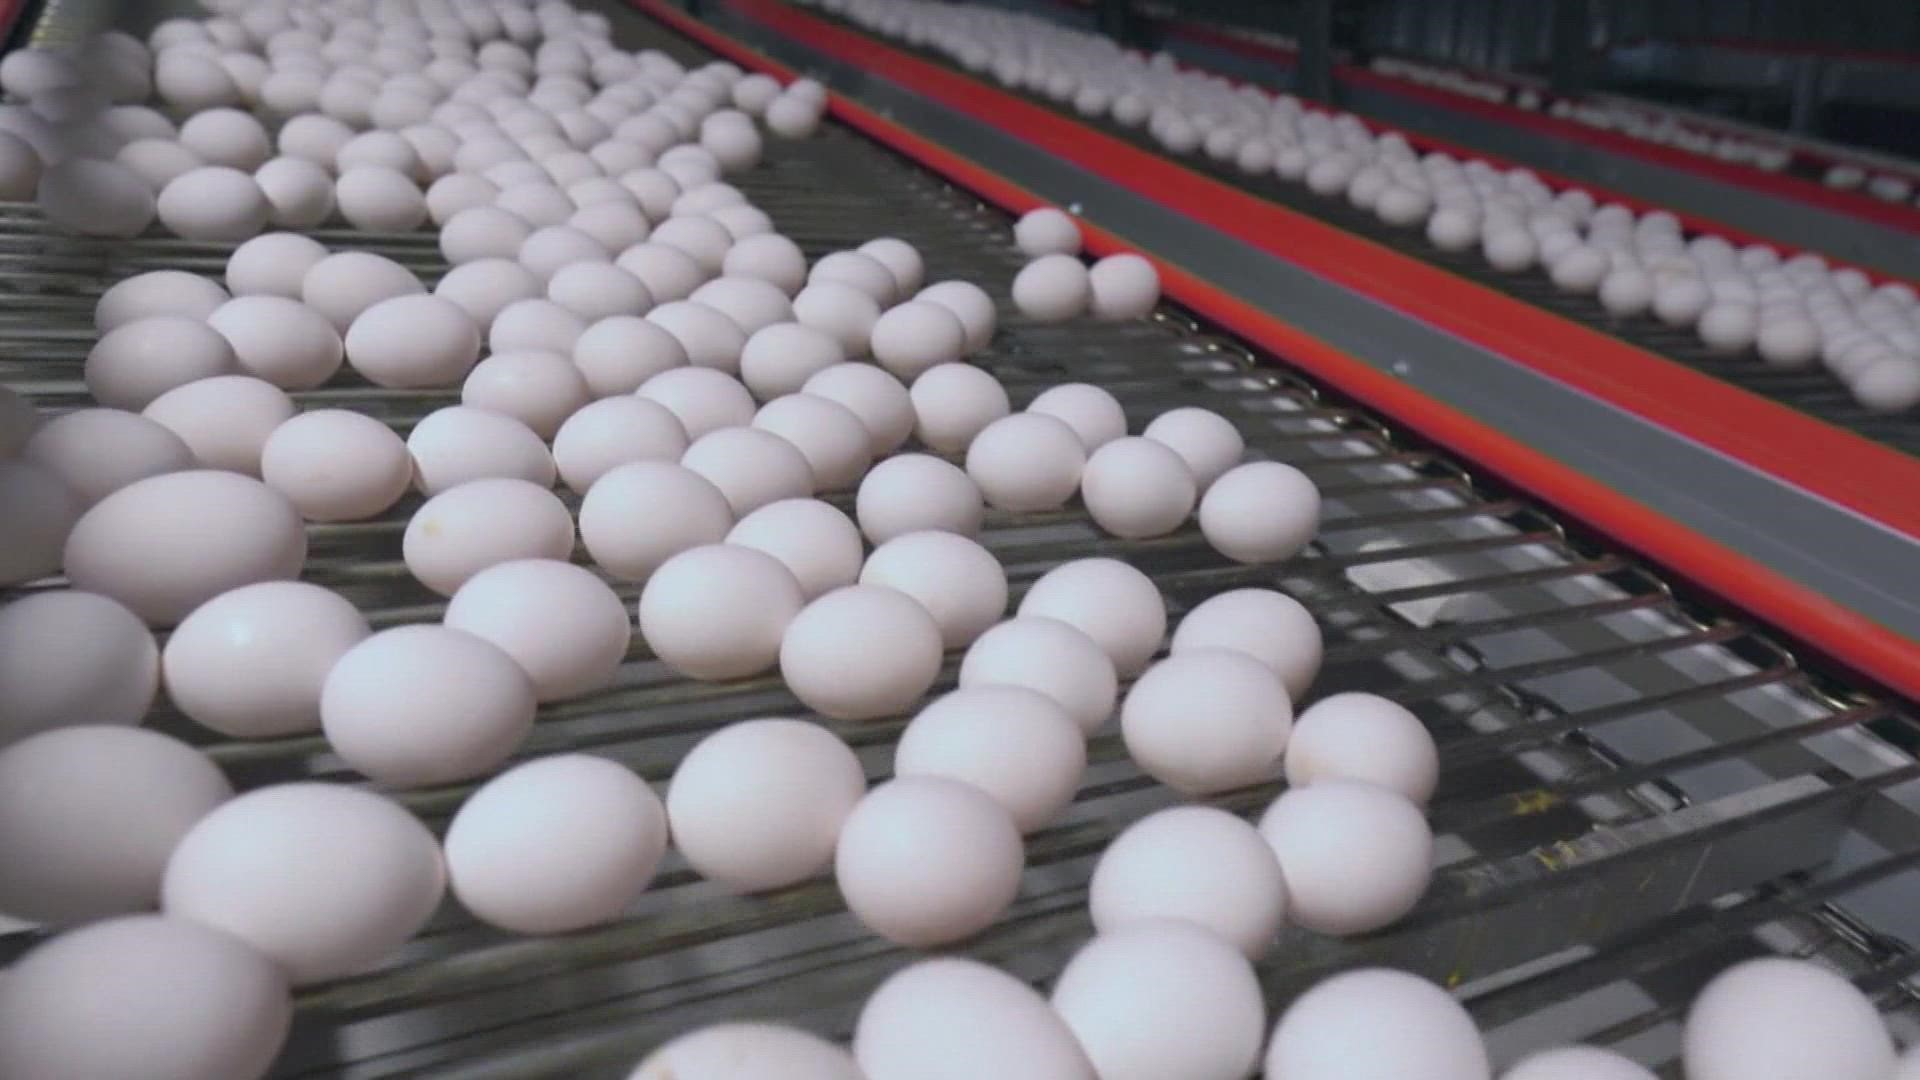 As egg prices continue soaring at local grocery stores, some shoppers are considering farm-fresh eggs as an option.